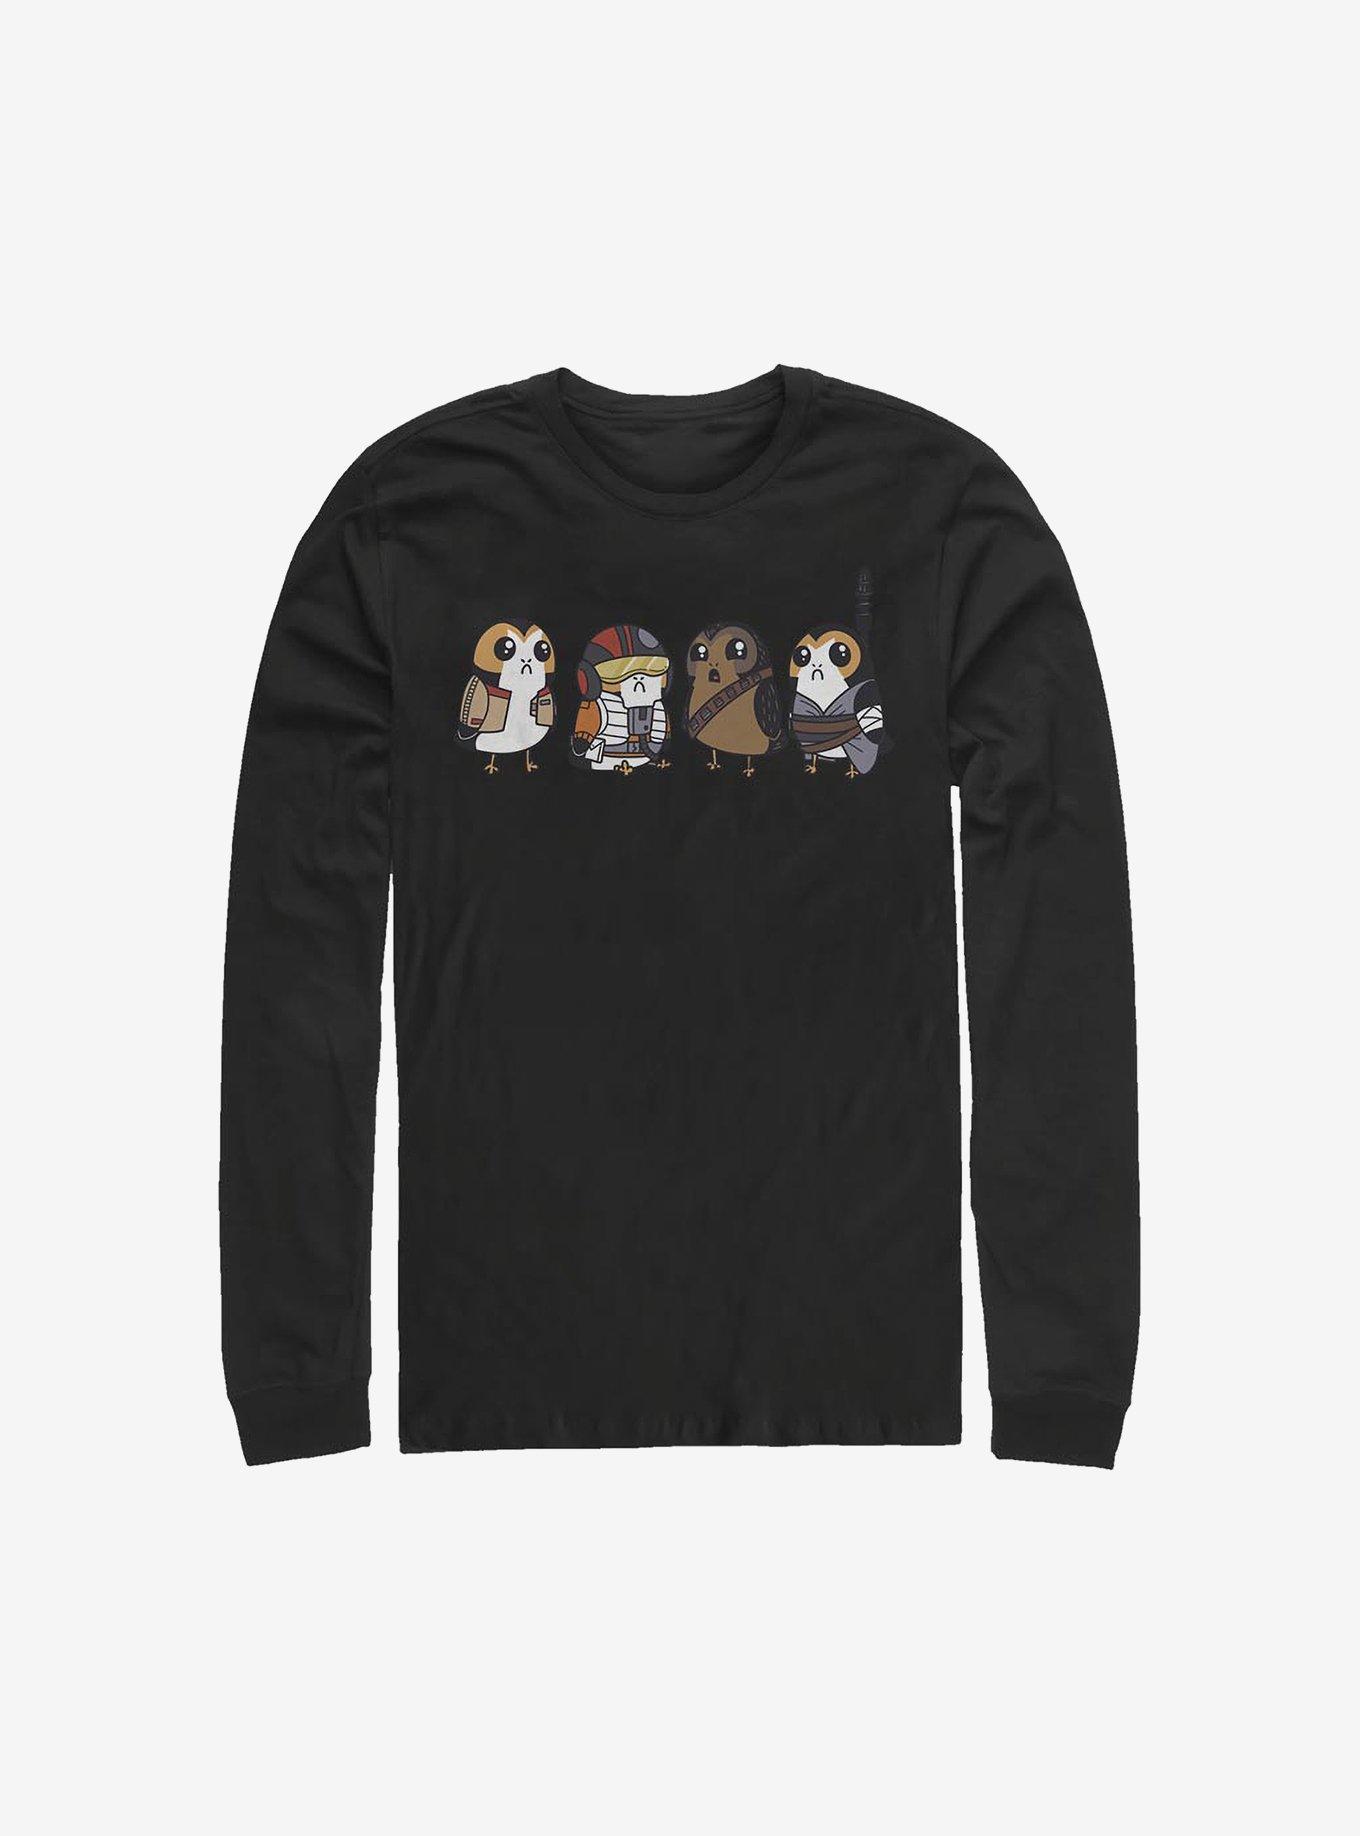 Star Wars: The Last Jedi Porgs As Characters Long-Sleeve T-Shirt, BLACK, hi-res